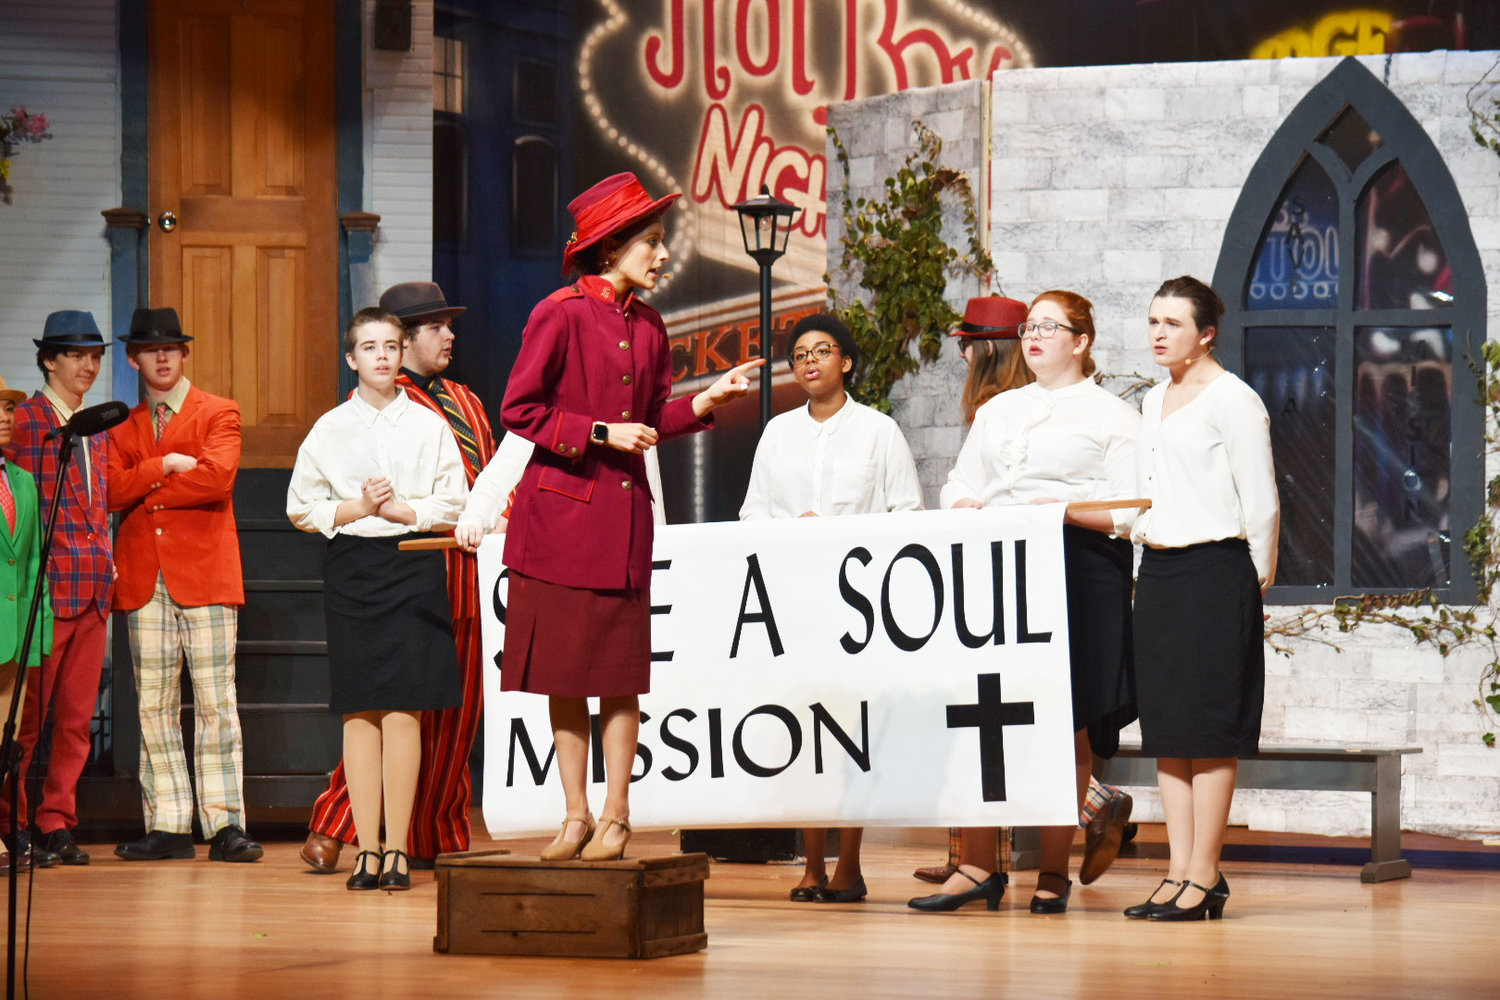 Chloe Girvin, center, portrays Sarah Brown, the principled leader of the Save-a-Soul Mission, in the Nantucket High School production of “Guys and Dolls.”